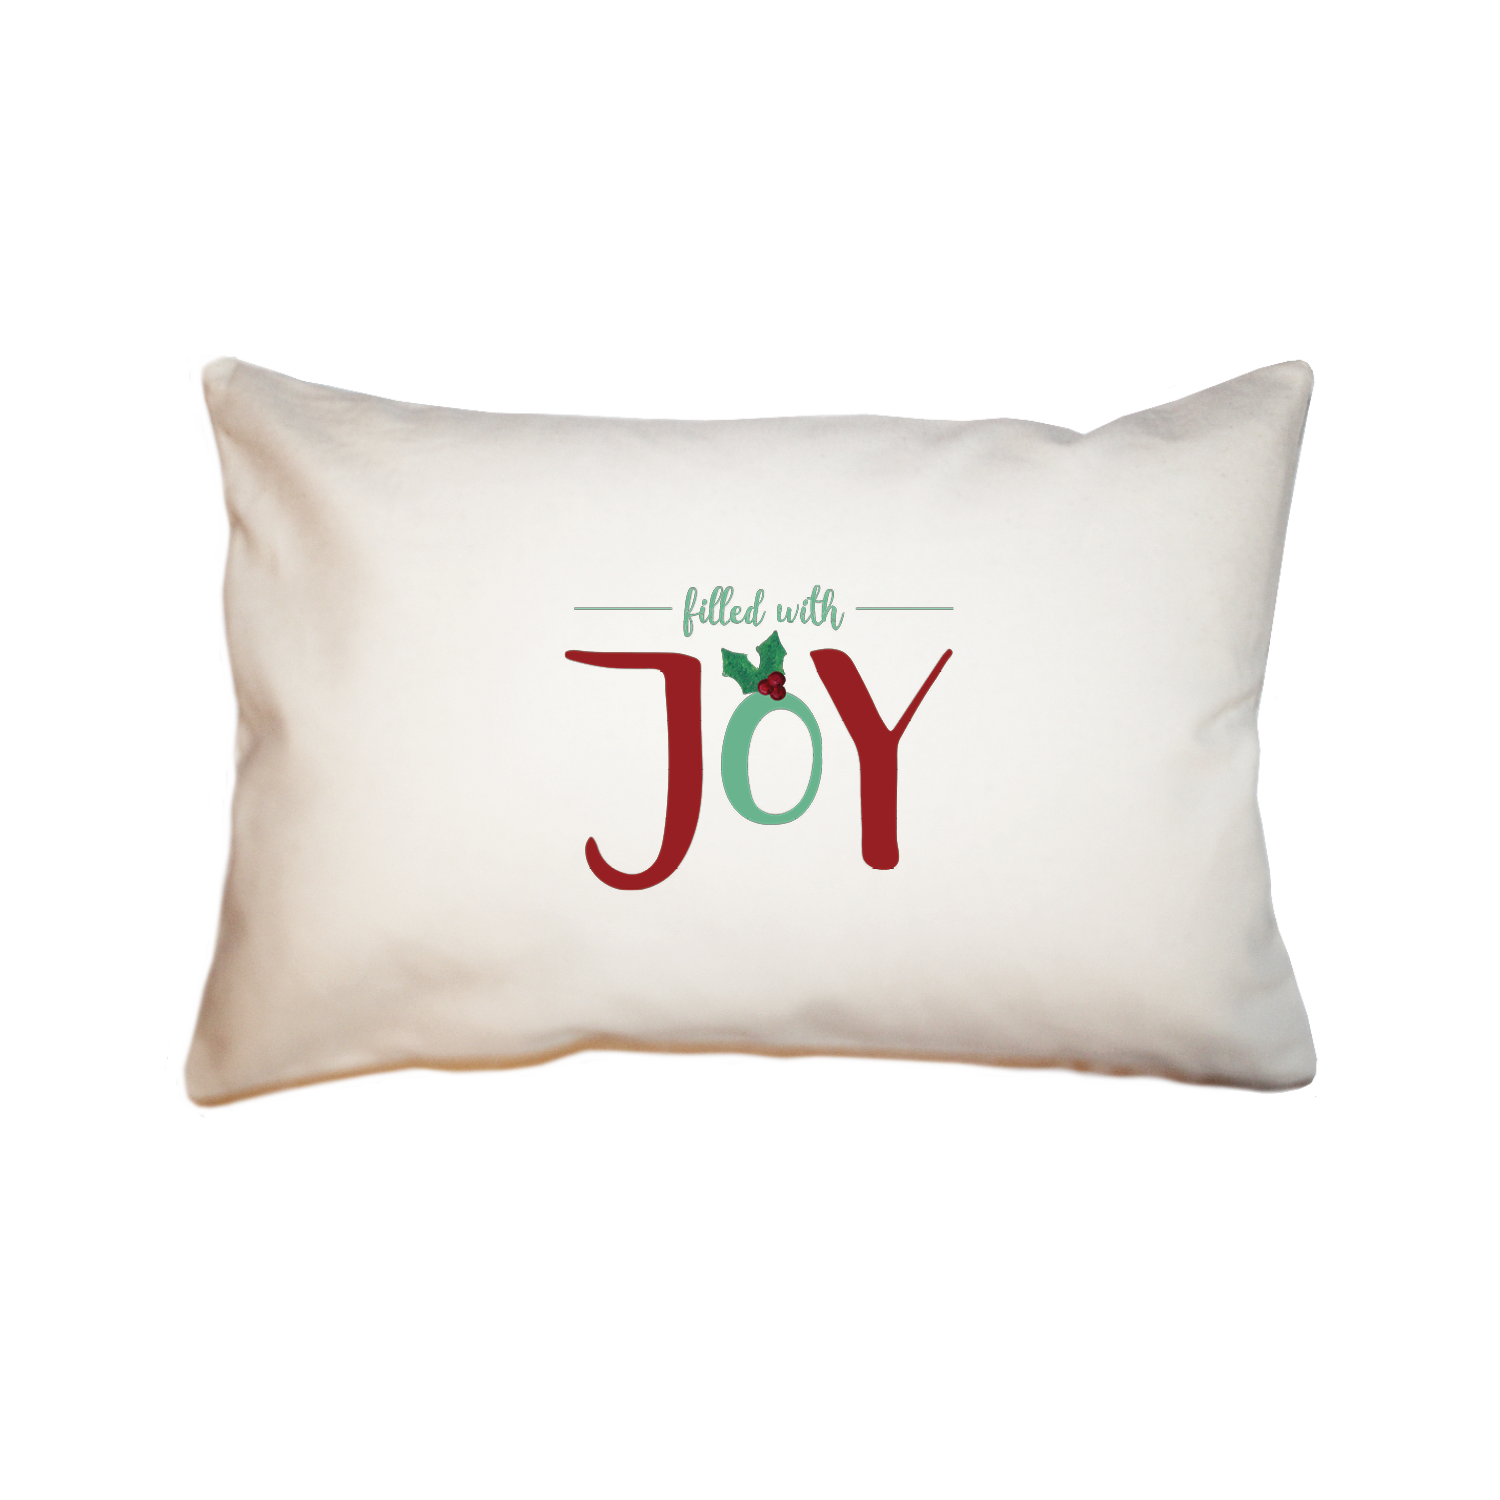 filled with joy large rectangle pillow